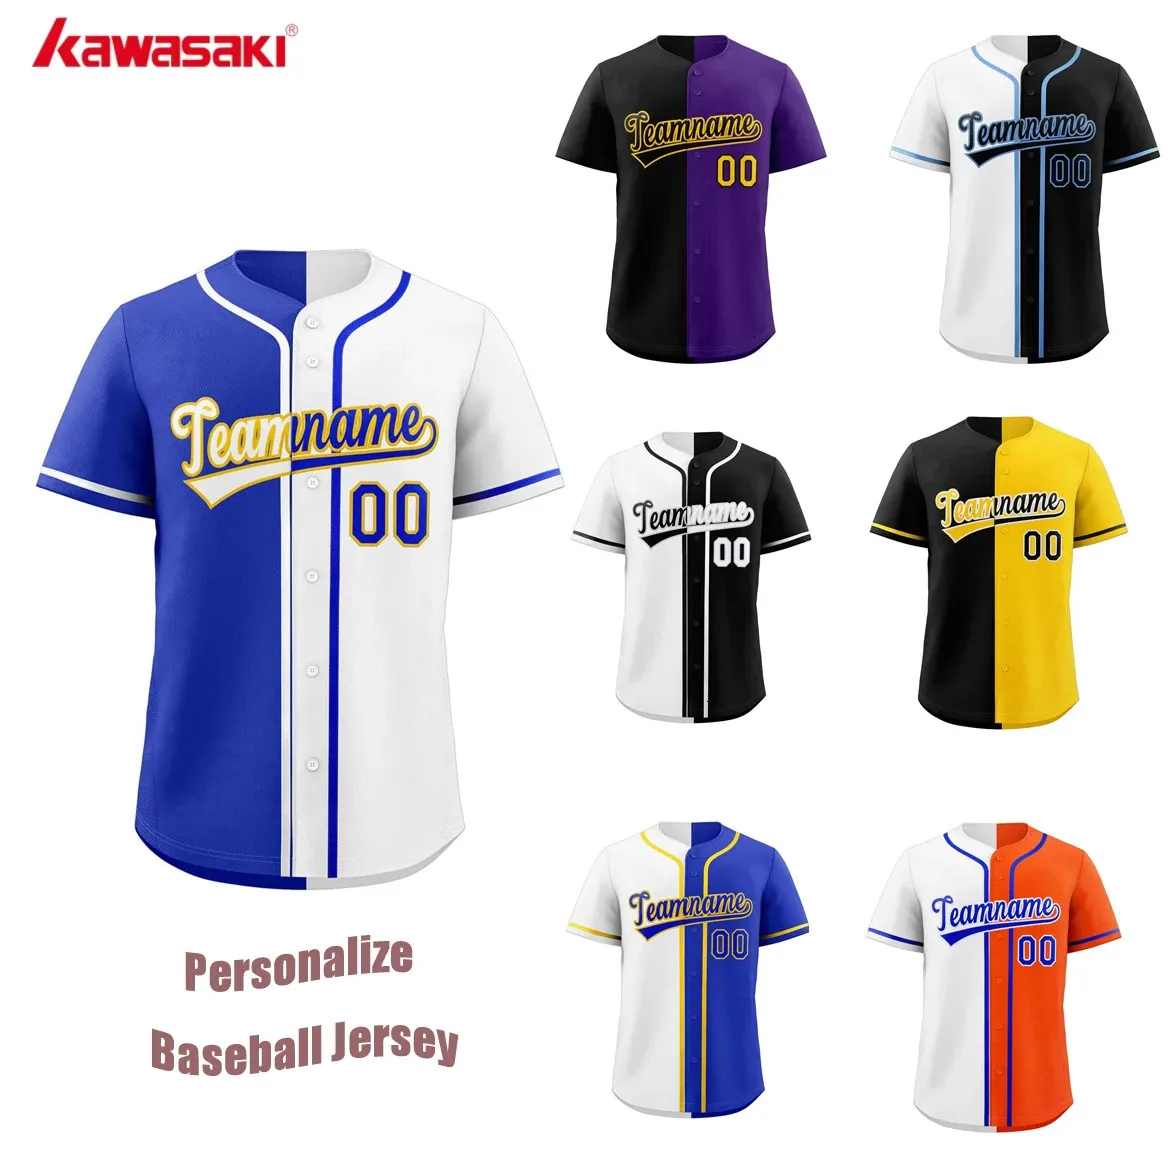 Baseball Custom Jerseys Split Jersey Button Down Shirt Sports Personalized Printed Name Number For MenWomenKid 240228